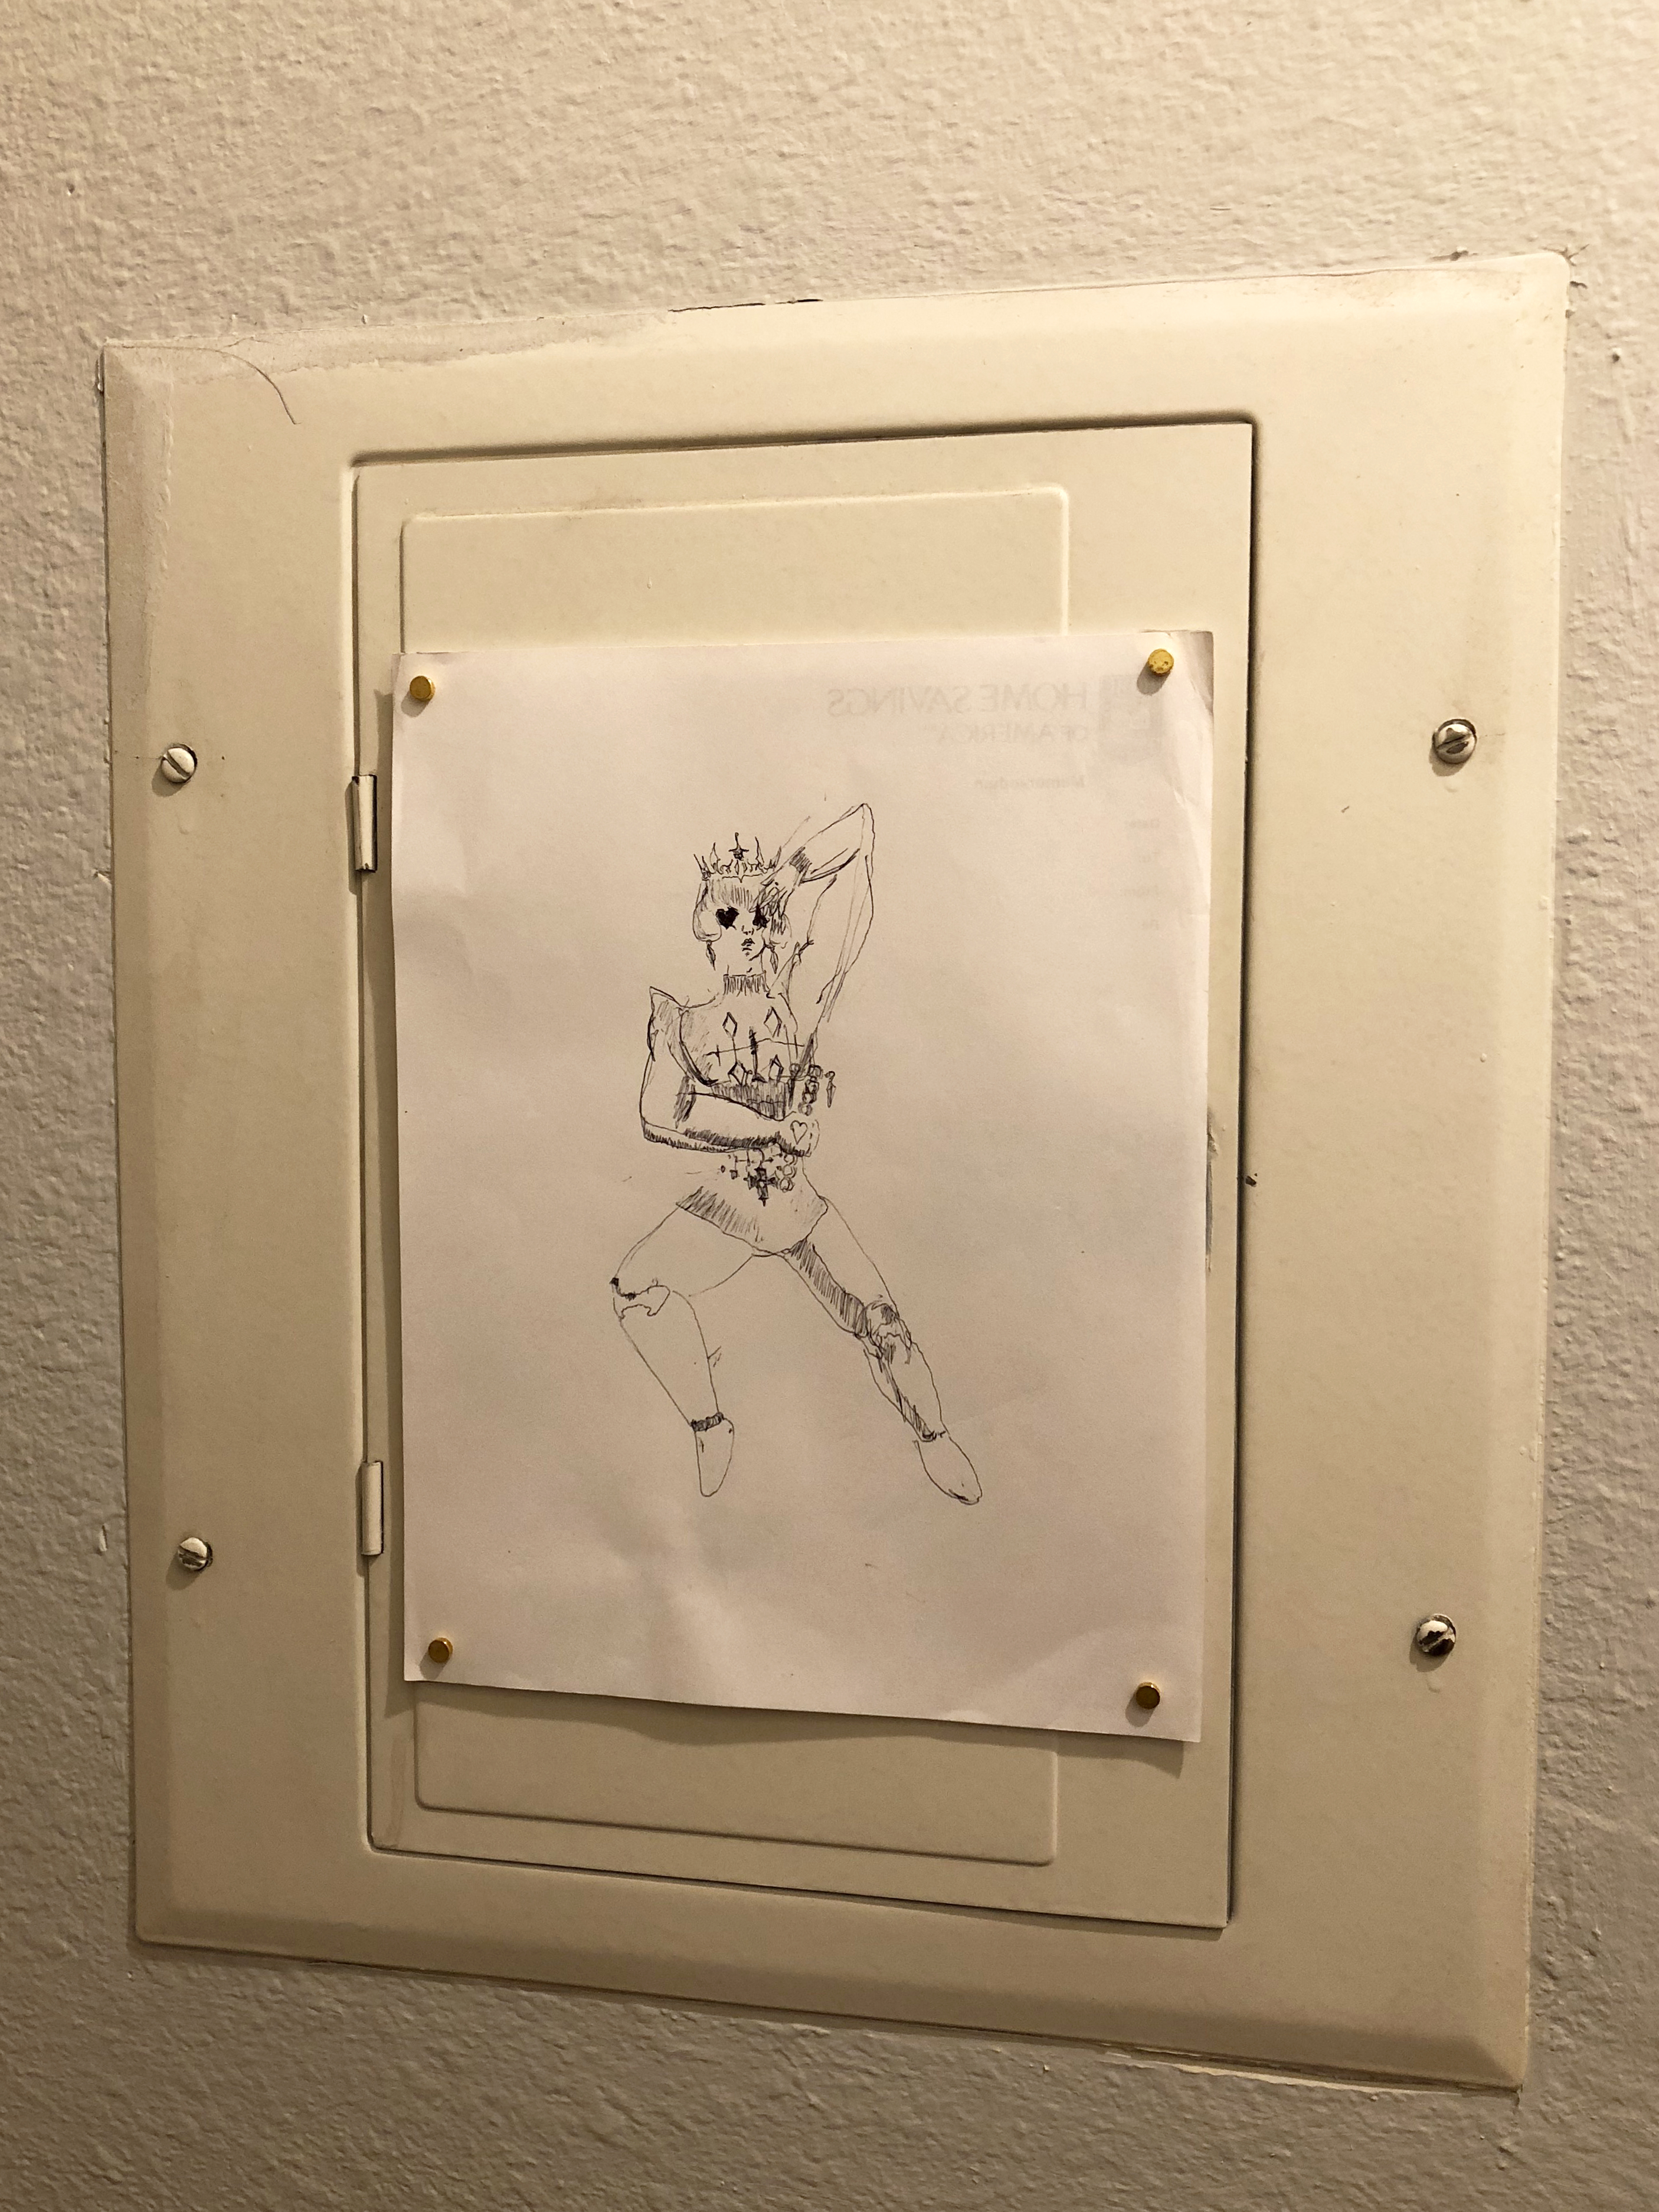 Drawing of a stylized prince character on white paper hung on an electrical box